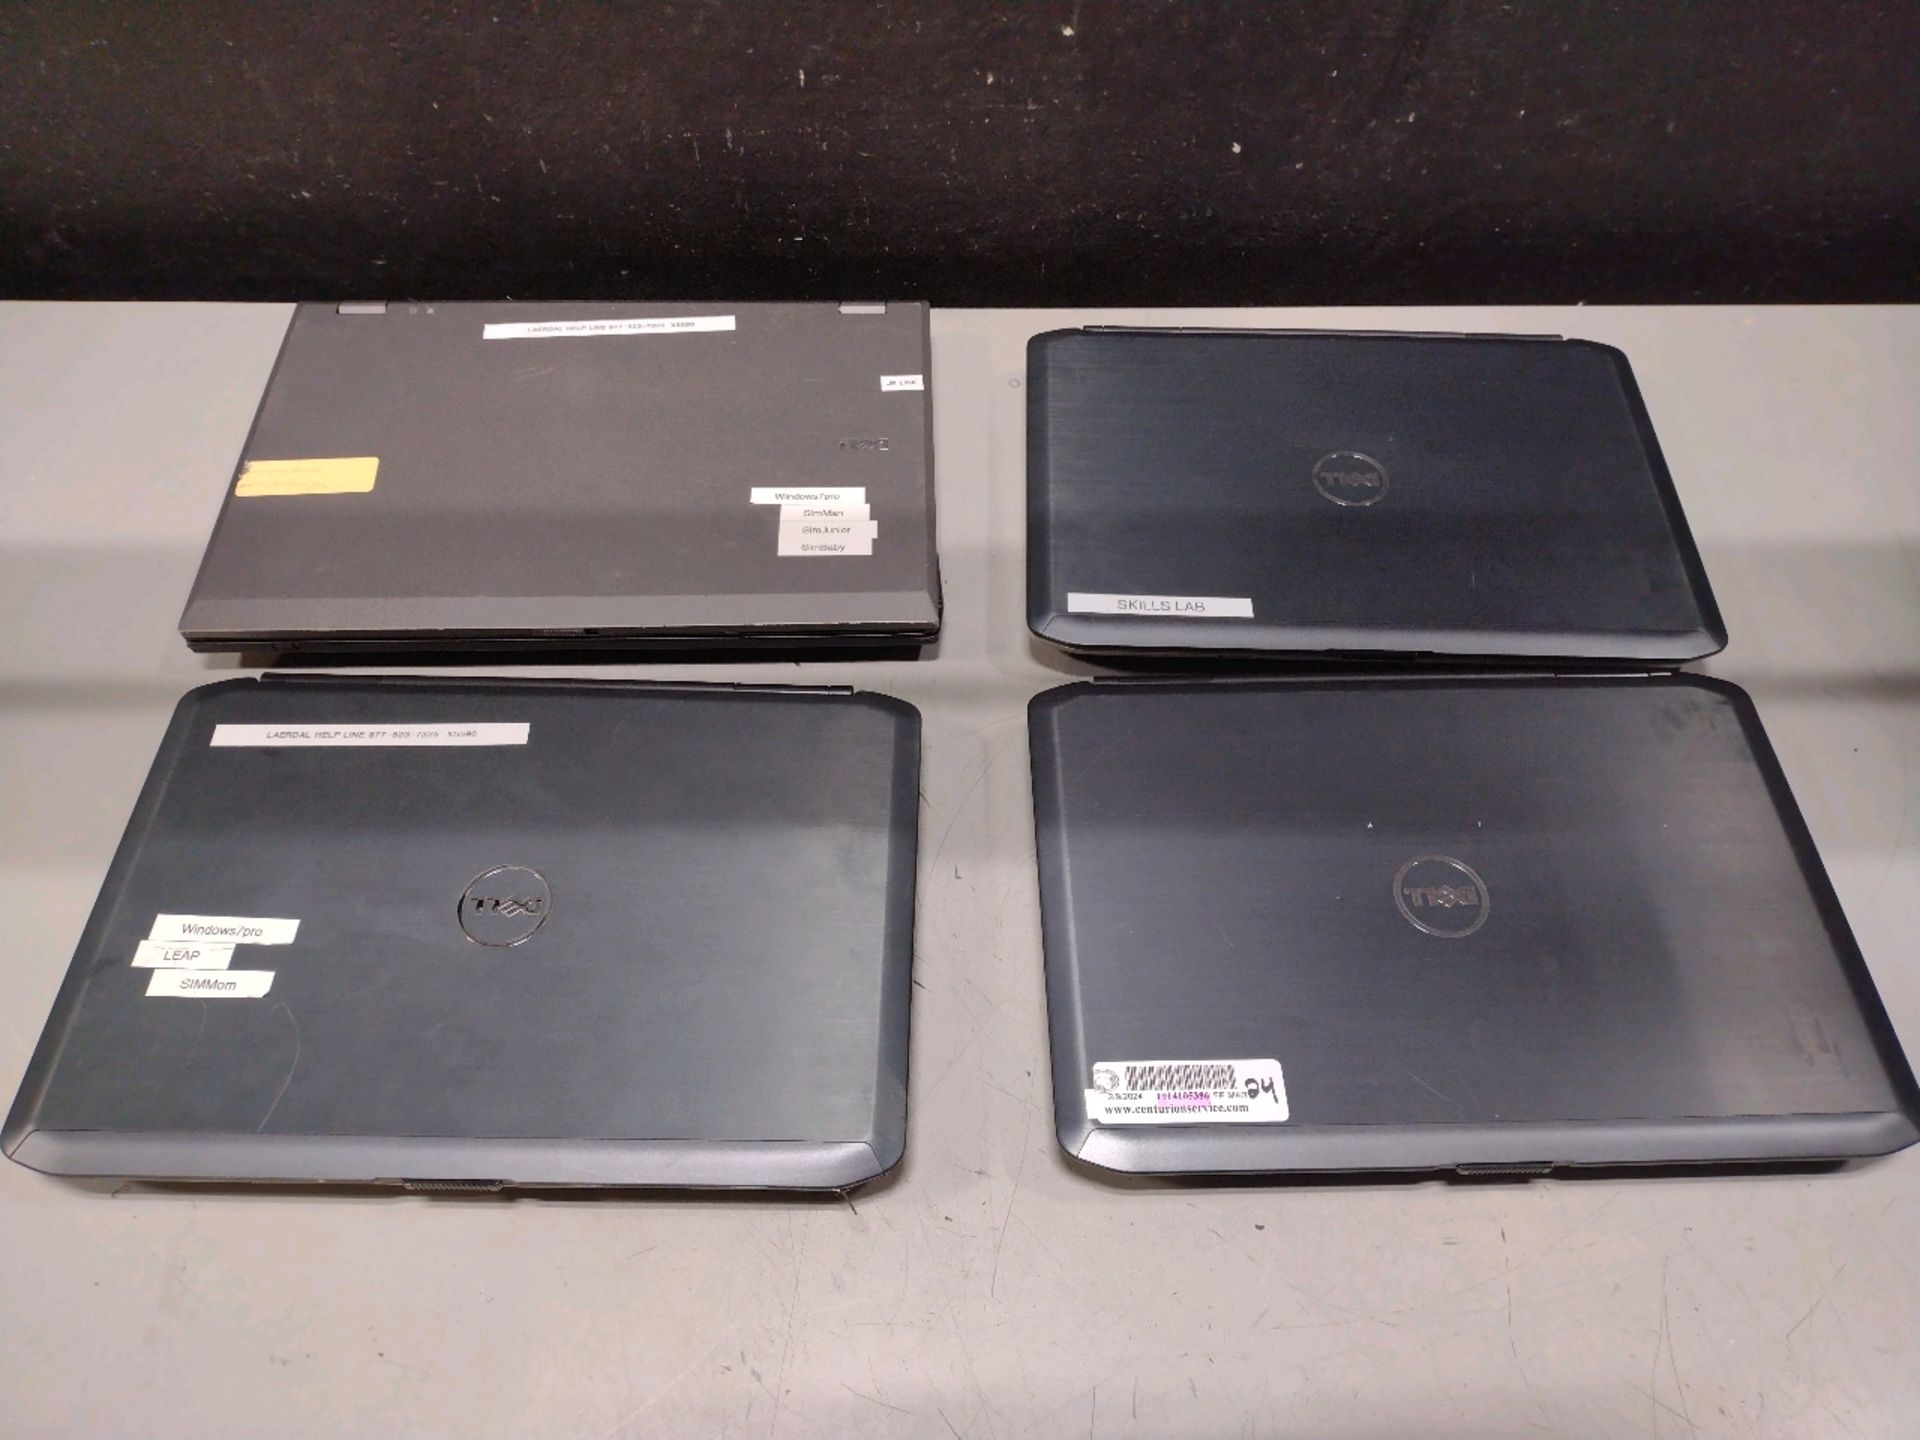 LOT OF (4) DELL LAPTOPS (LOCATED AT 3325 MOUNT PROSPECT ROAD, FRANKLIN PARK, IL, 60131) - Image 4 of 4